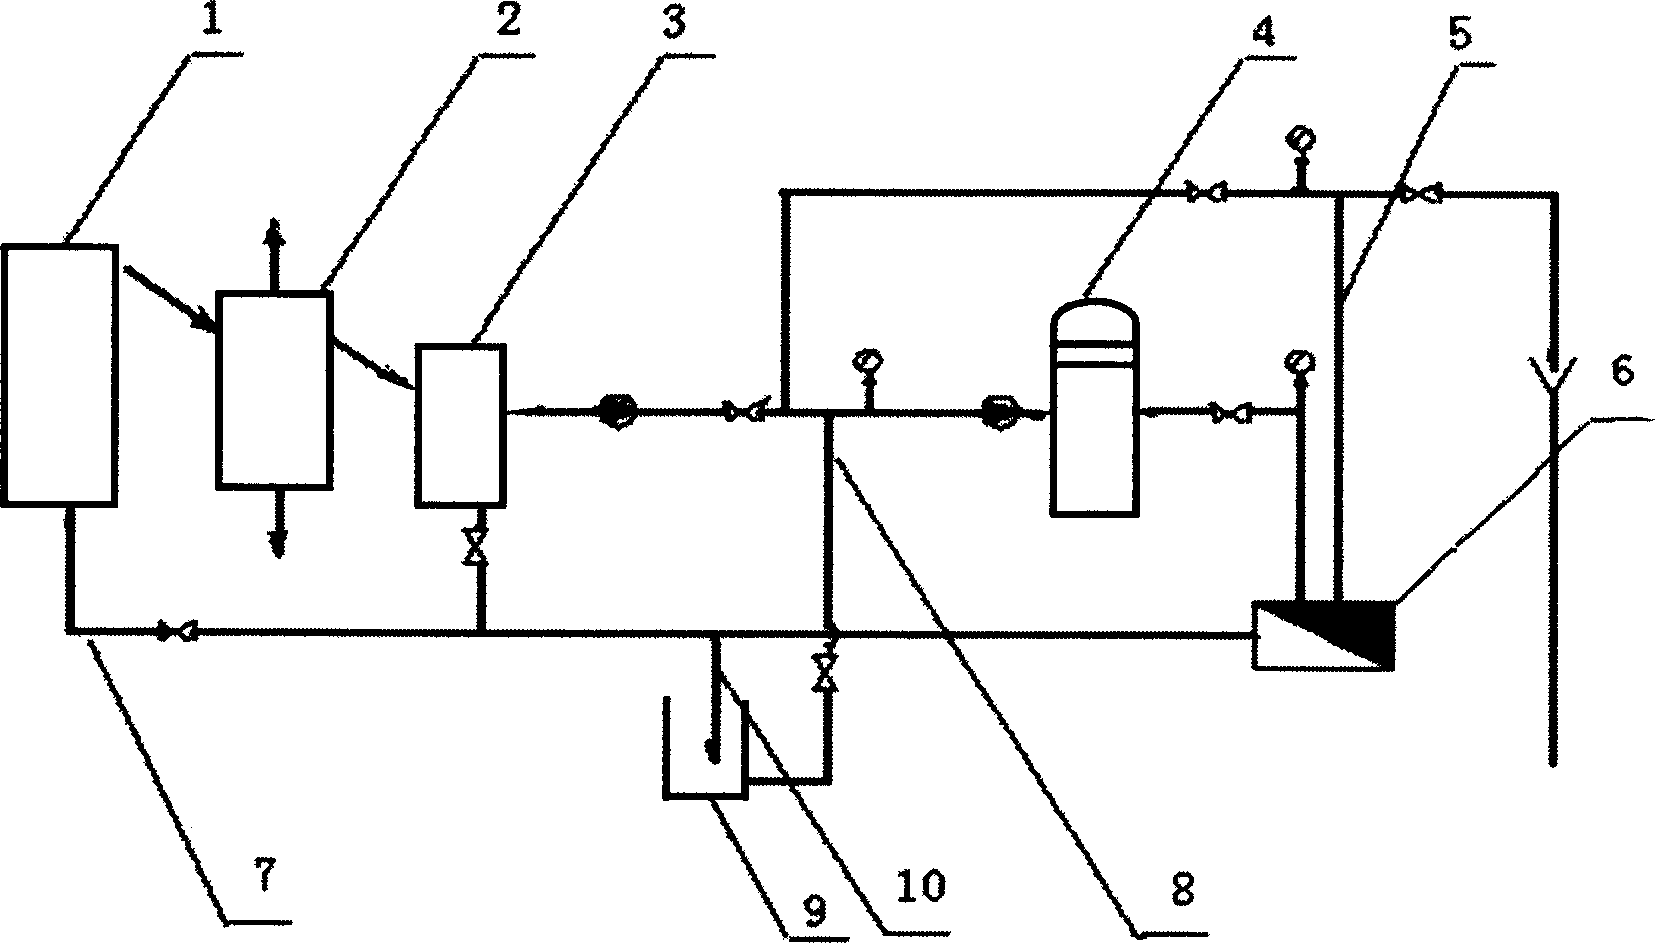 Method for separating oil and water of and circularly using degreasant tank-liquor using ultrafiltration technology